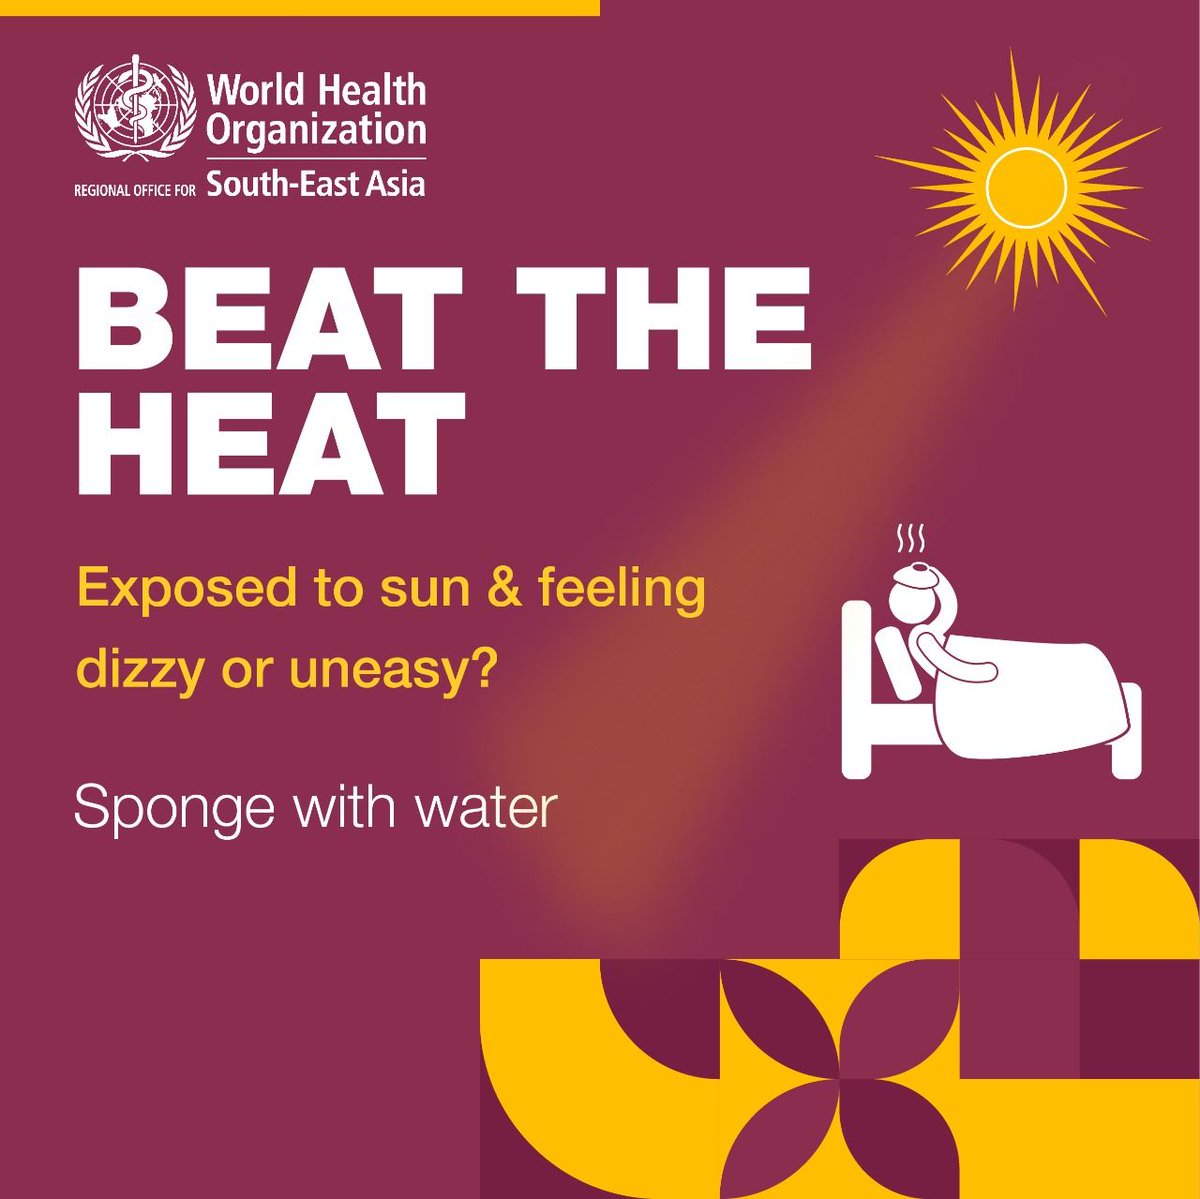 If you’ve been exposed to the sun ☀️ and feel uneasy, sponge your body with water.